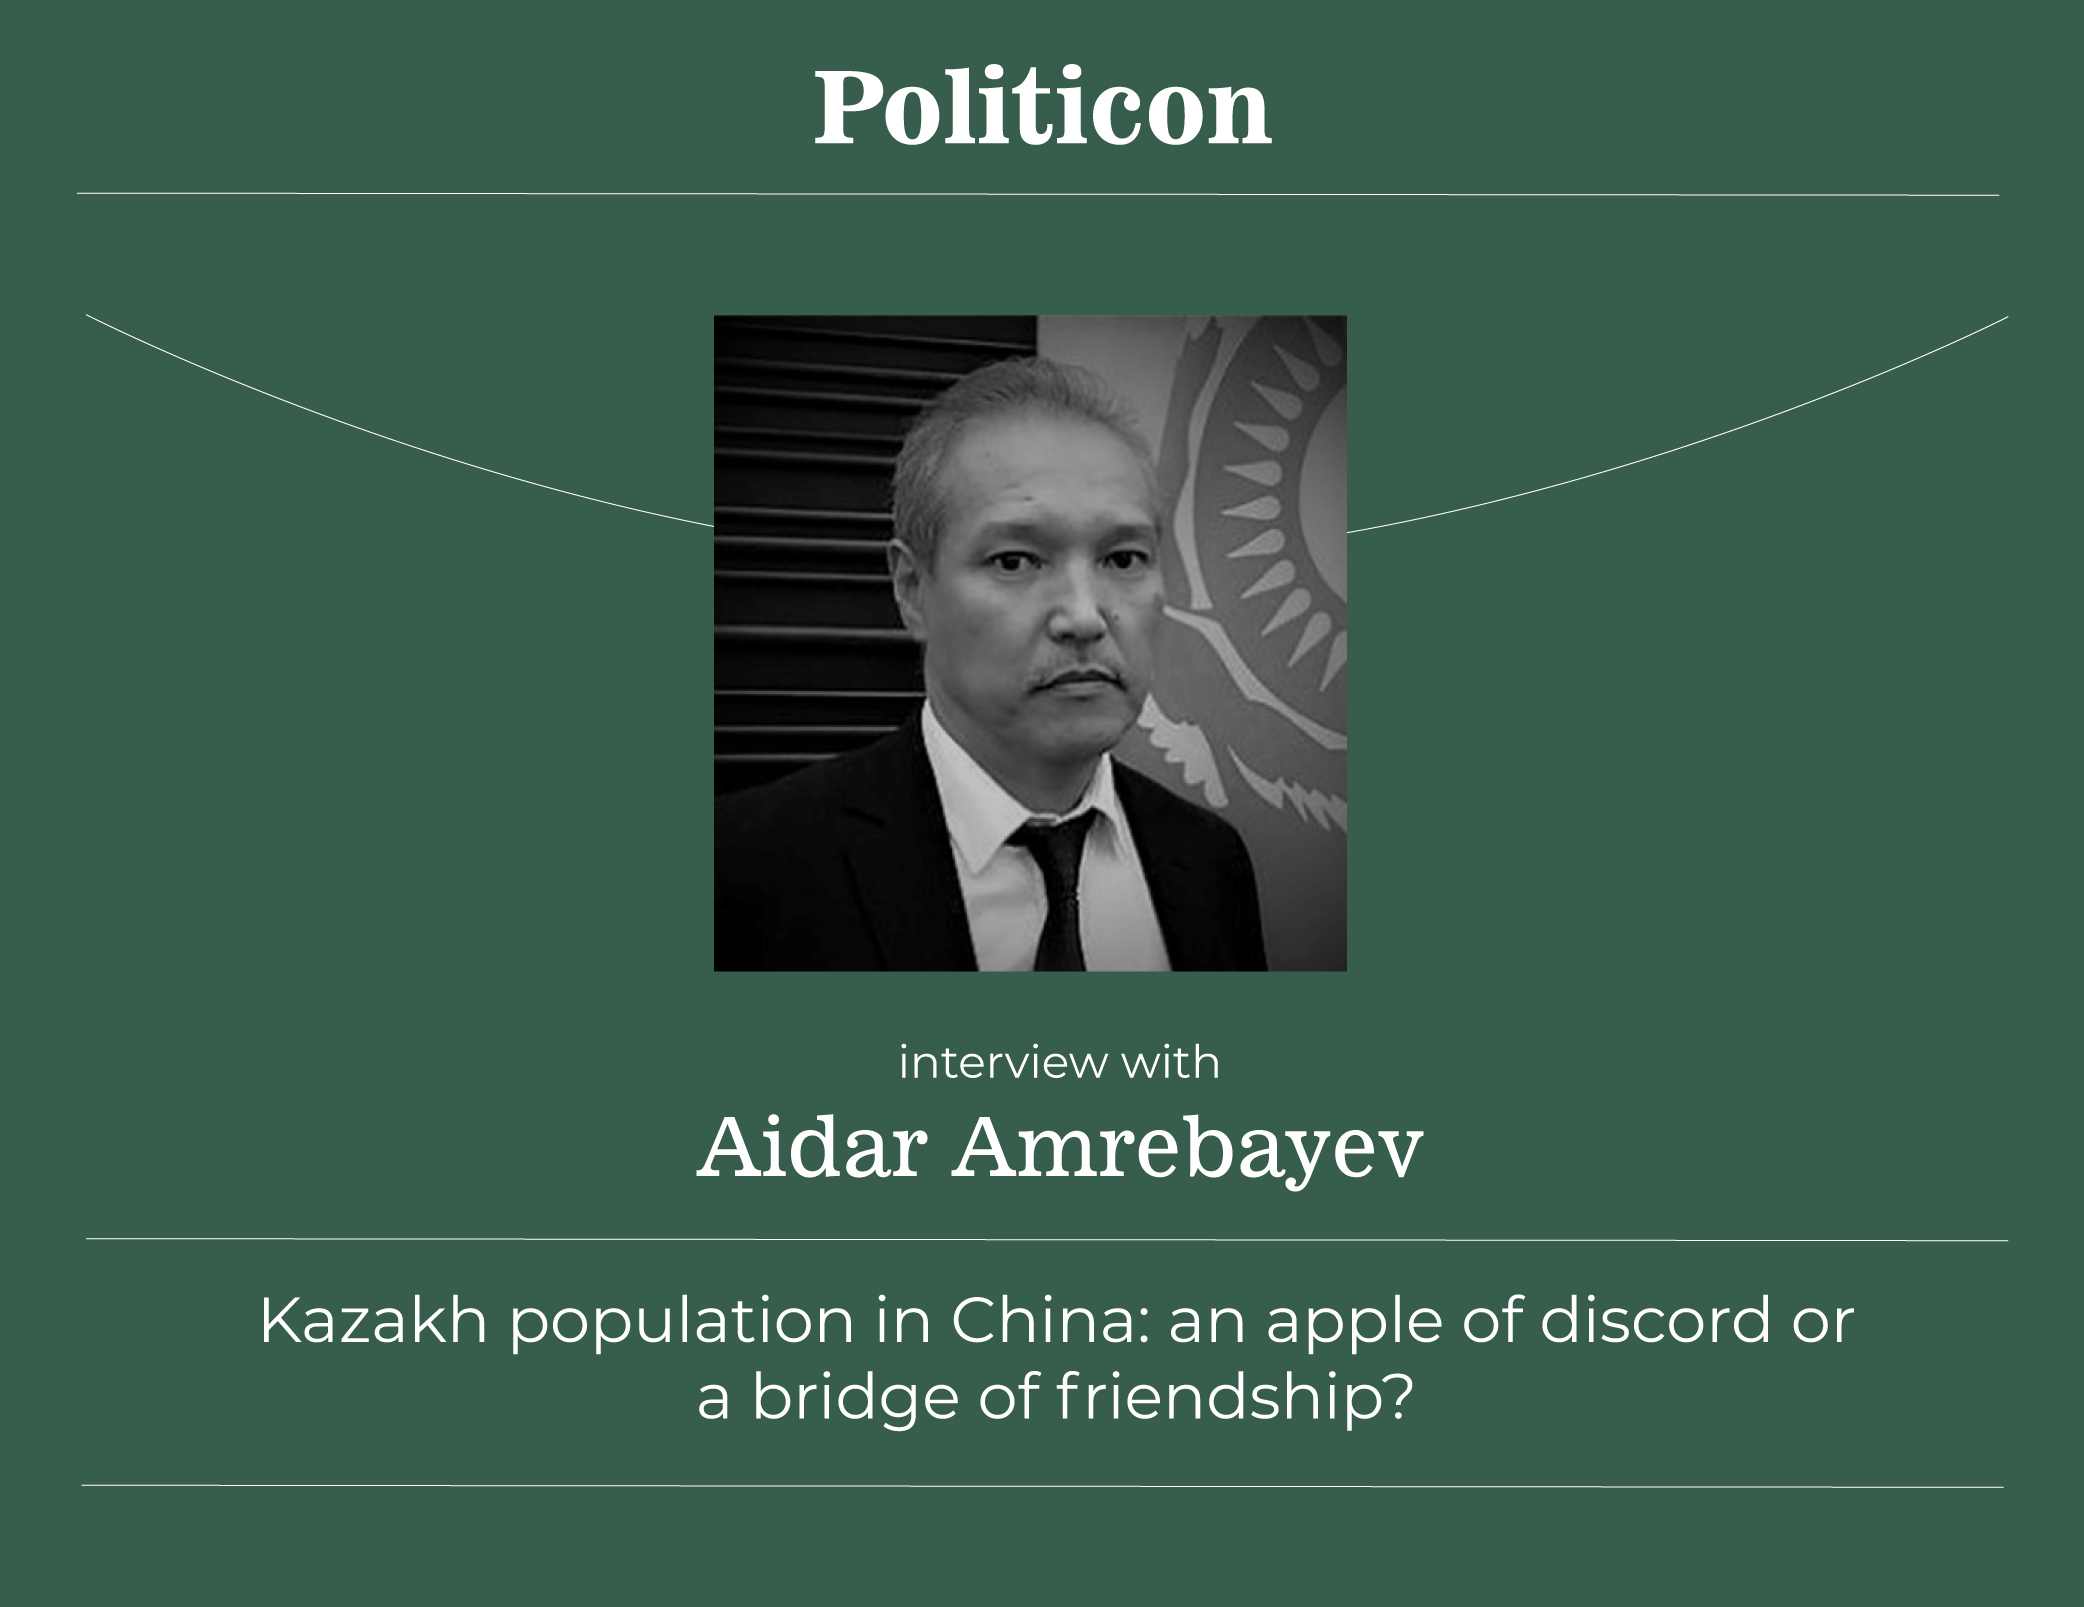 Kazakh population in China:  an apple of discord or a bridge of friendship?